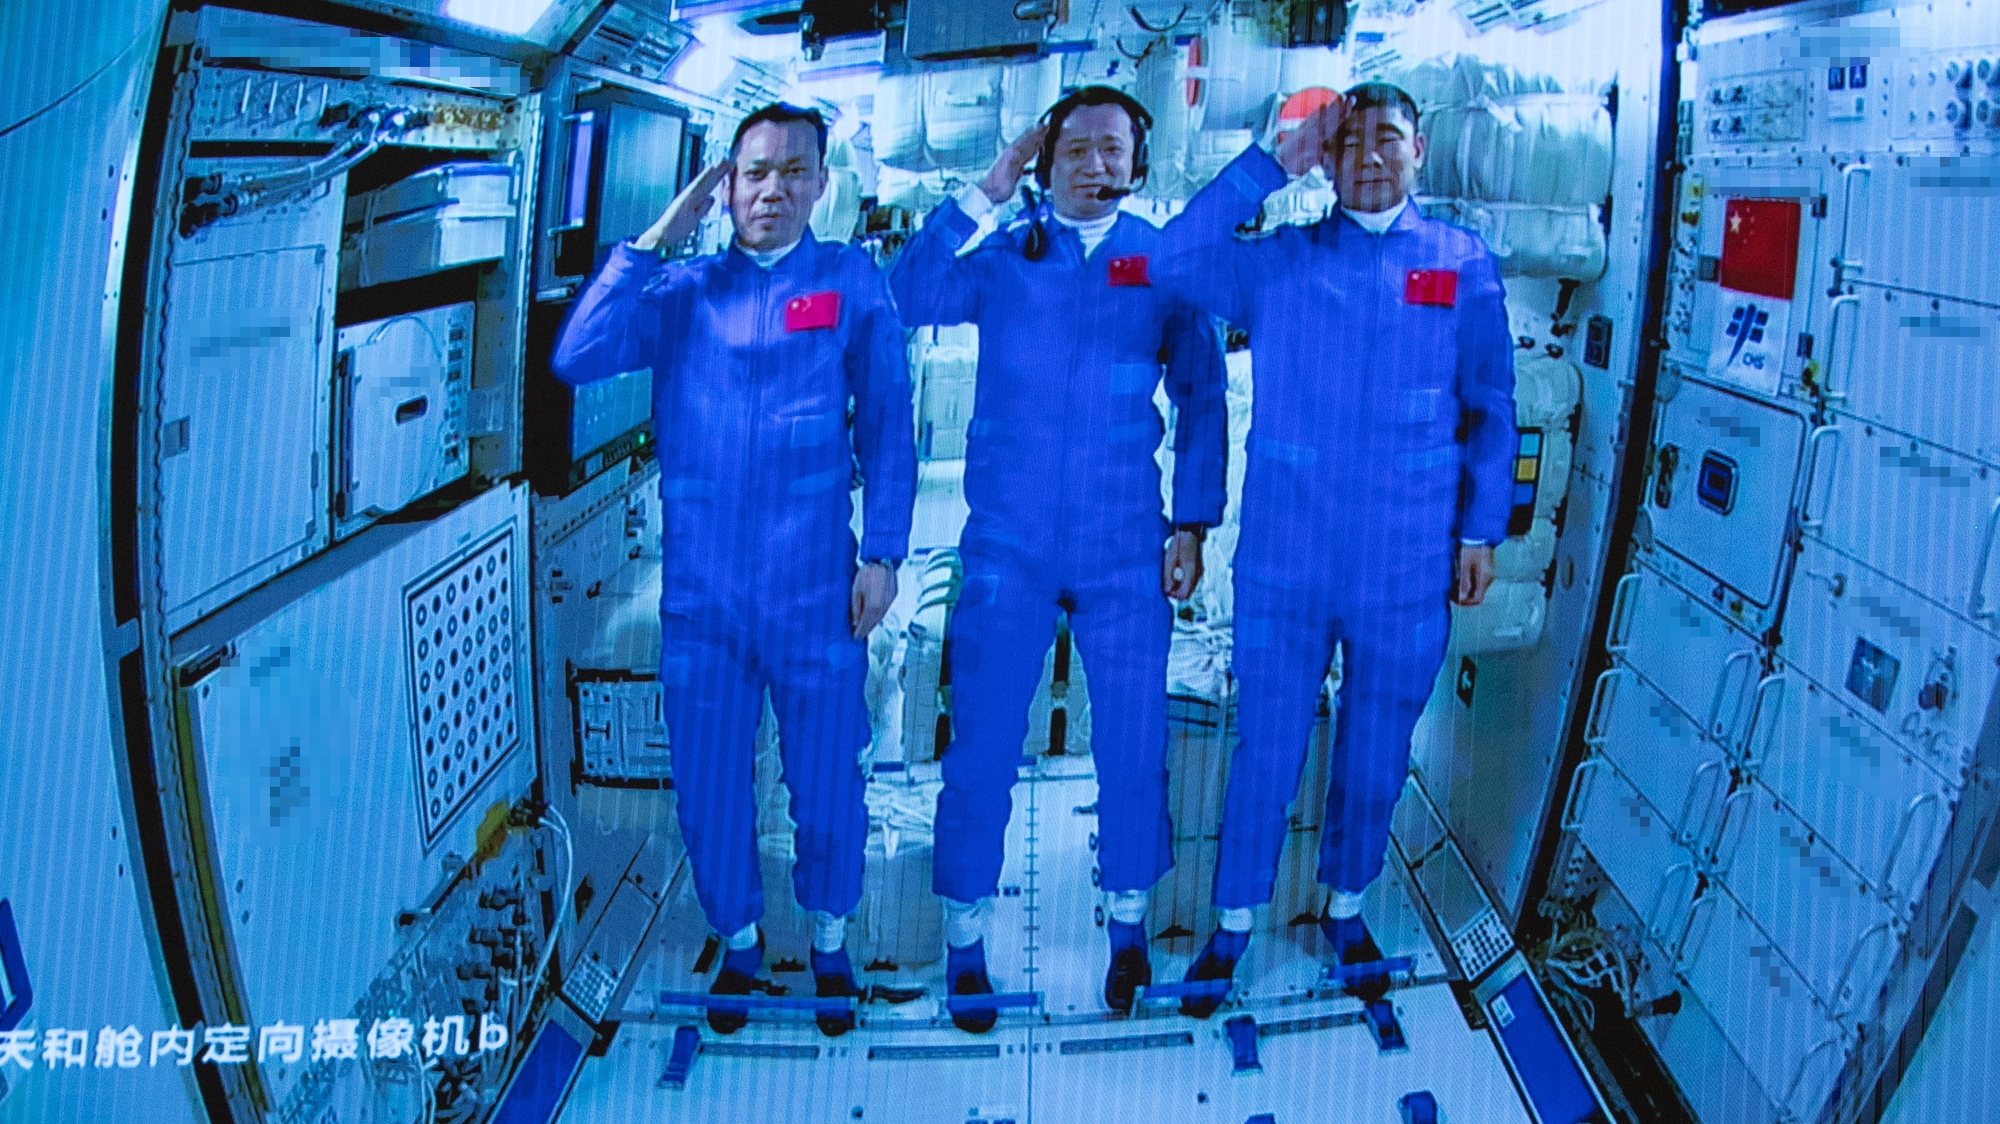 epa09281811 A screen image made available by Xinhua News Agency captured at the Beijing Aerospace Control Center shows three Chinese astronauts onboard the Shenzhou-12 spaceship saluting after entering the Tianhe space station core module in Beijing, China, 17 June 2021 (issued 18 June 2021). China launched the Shenzhou-12 spacecraft carrying three crew members Tang Hongbo, Nie Haisheng, and Liu Boming to the orbiting Tianhe core module for a three-month mission on 17 June. The mission is China&#039;s first manned spaceflight in almost five years.  EPA/XINHUA/JIN LIWANG MANDATORY CREDIT EDITORIAL USE ONLY/NO SALES